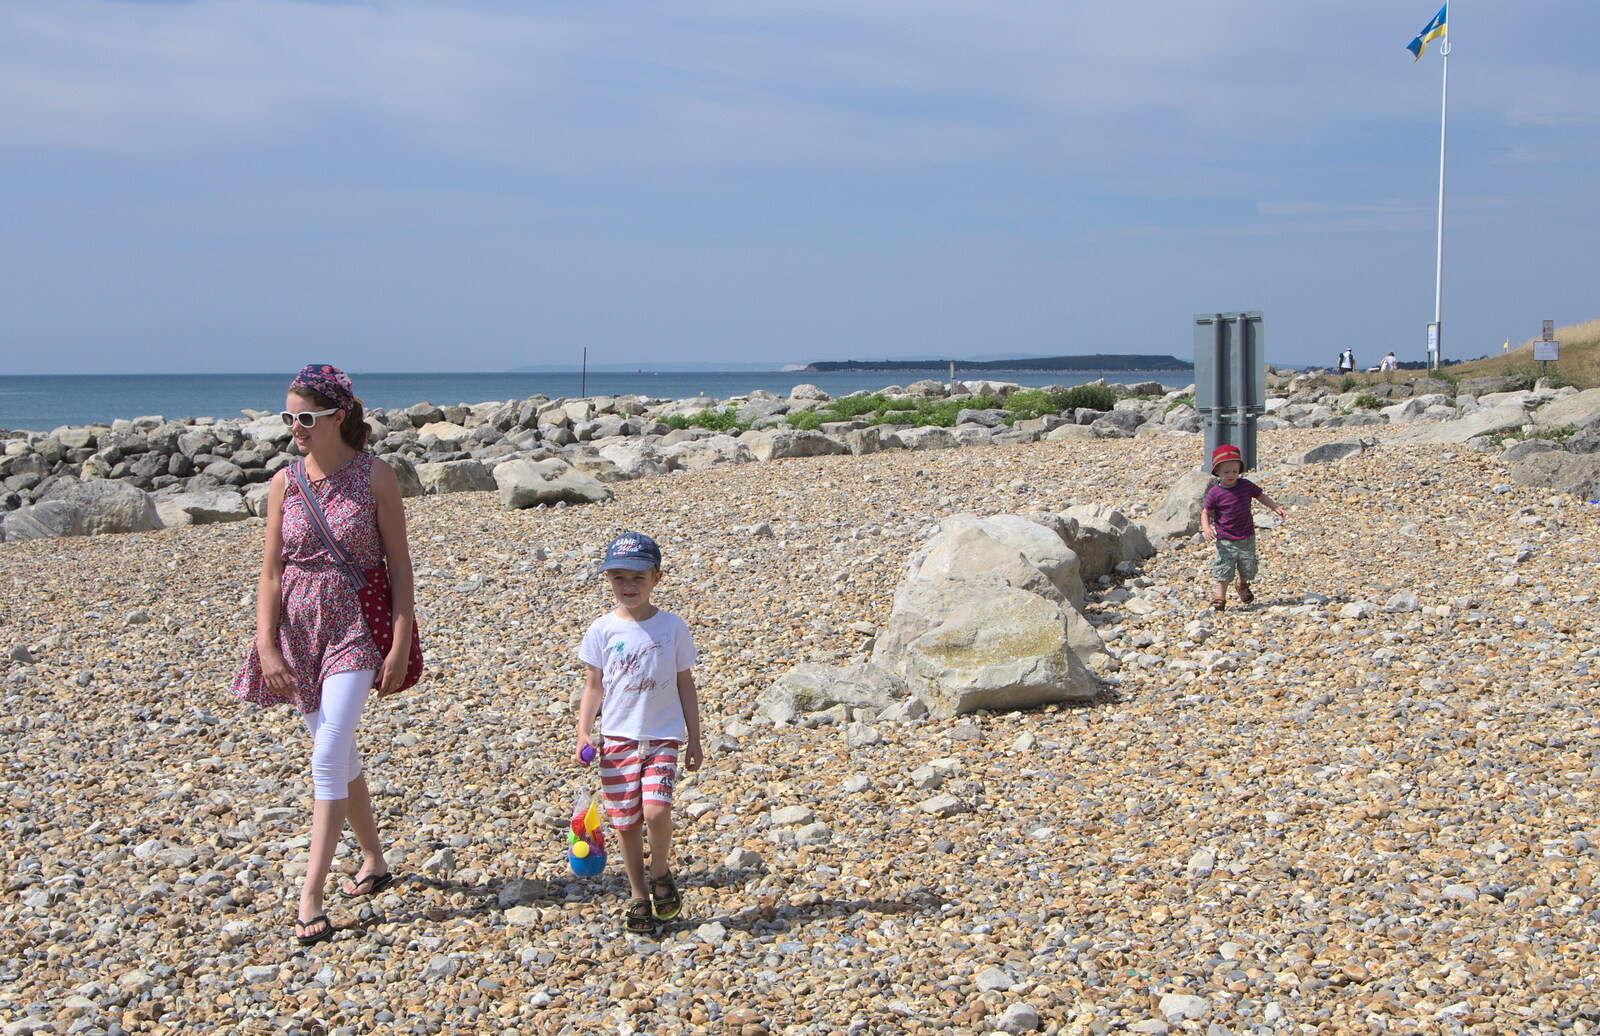 On the beach from Bob and Bernice's 50th Wedding Anniversary, Hinton Admiral, Dorset - 25th July 2014